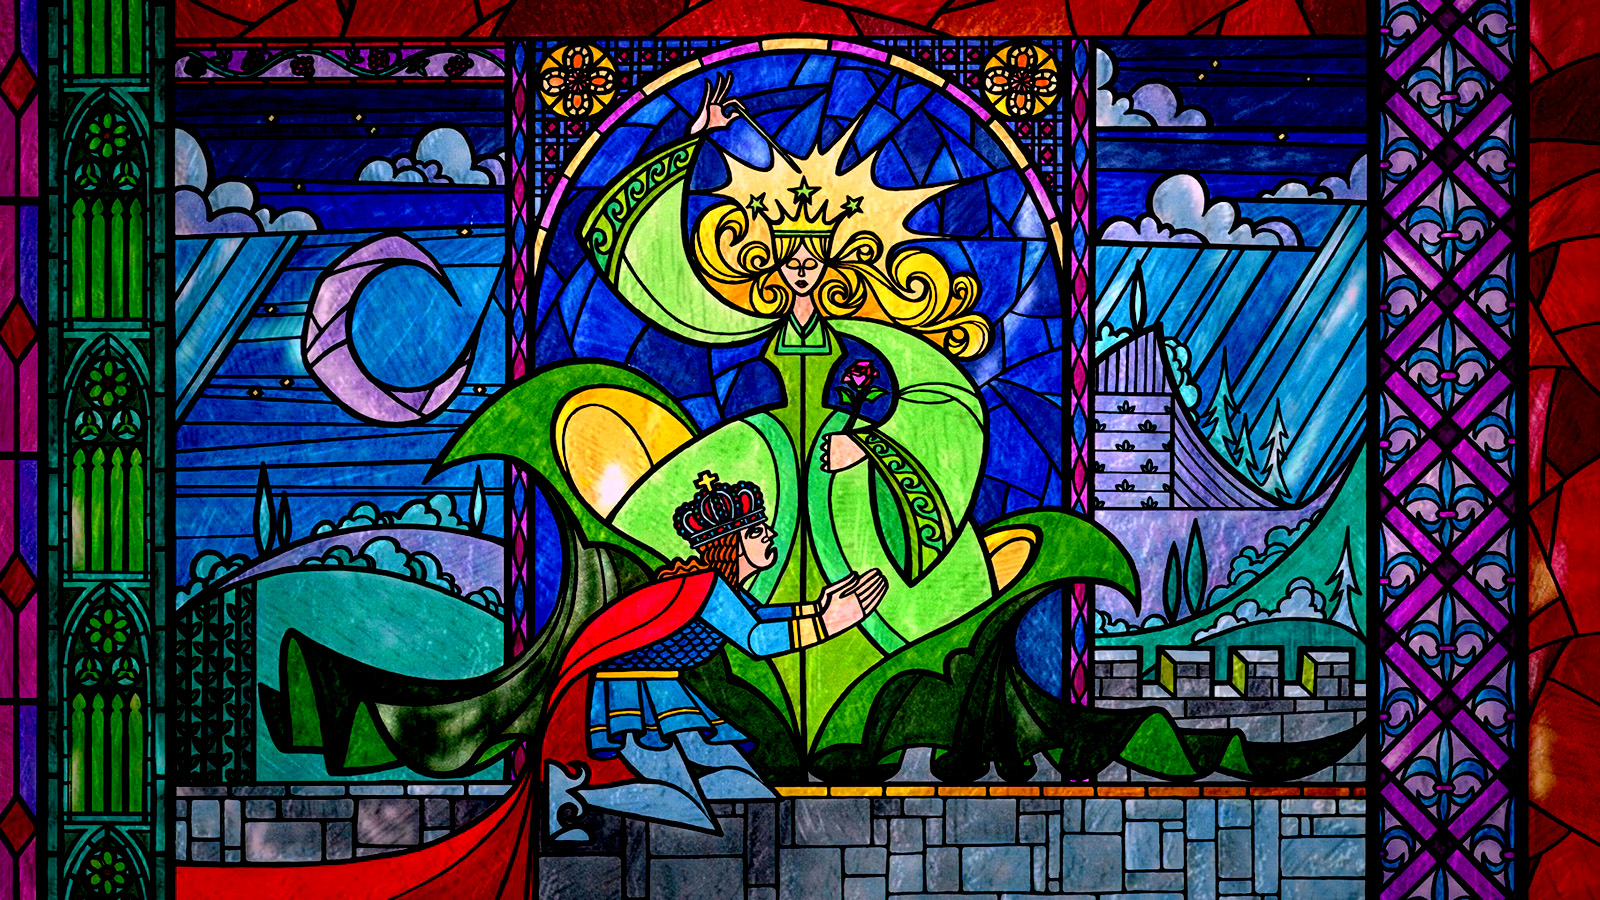 stained glass wallpaper,stained glass,glass,art,psychedelic art,modern art